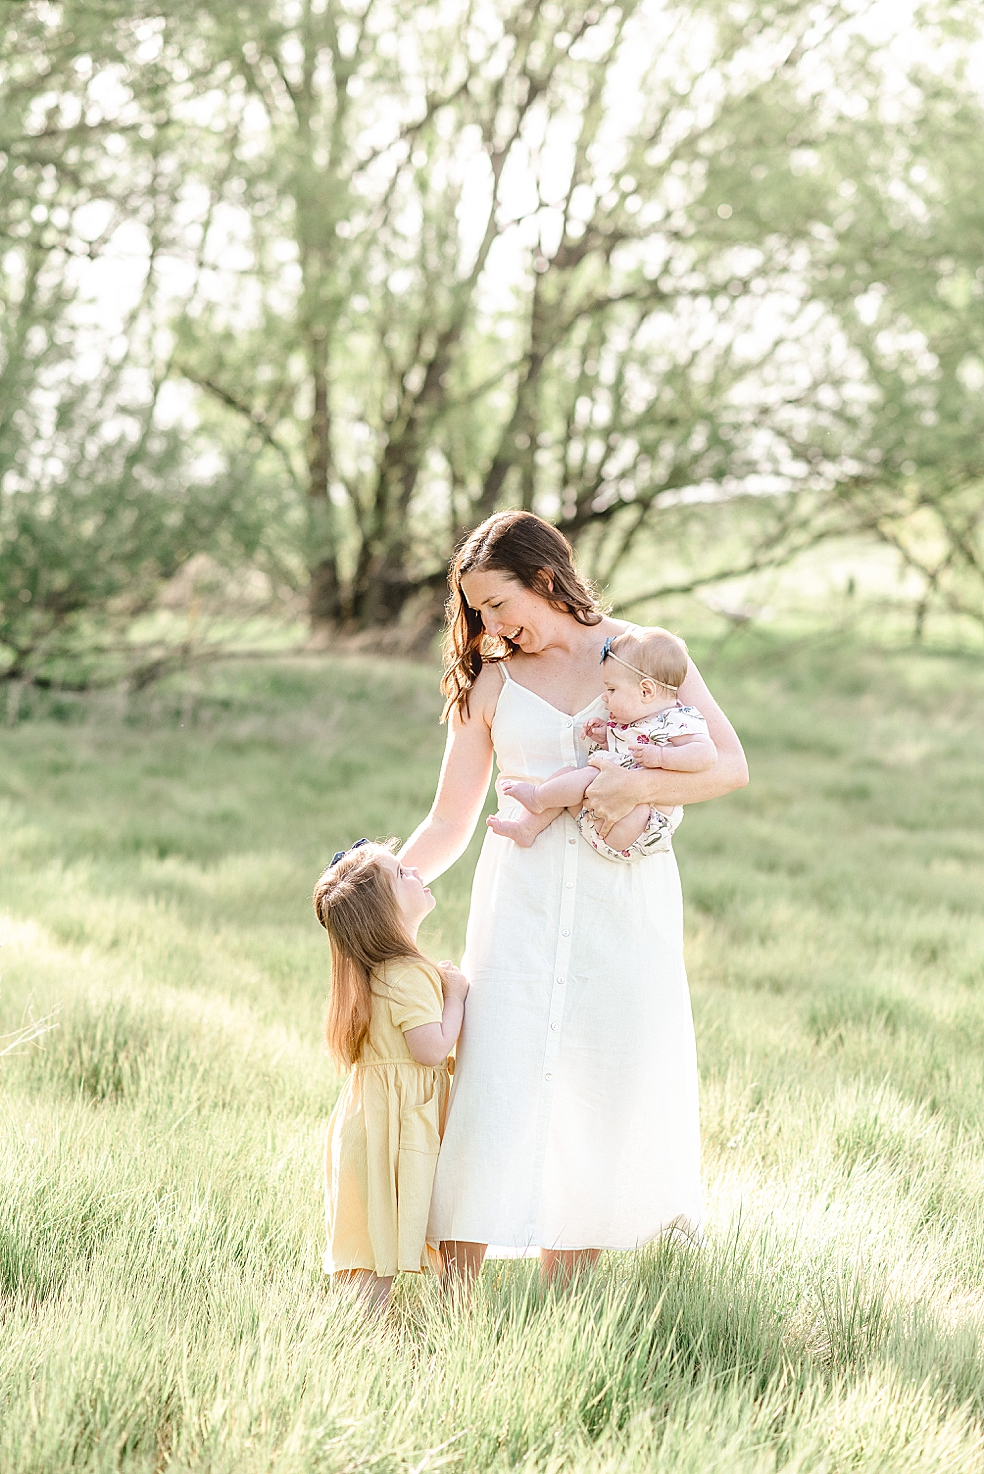 Mom playing with her two daughters in a field | Photo by Jessica Lee Photography